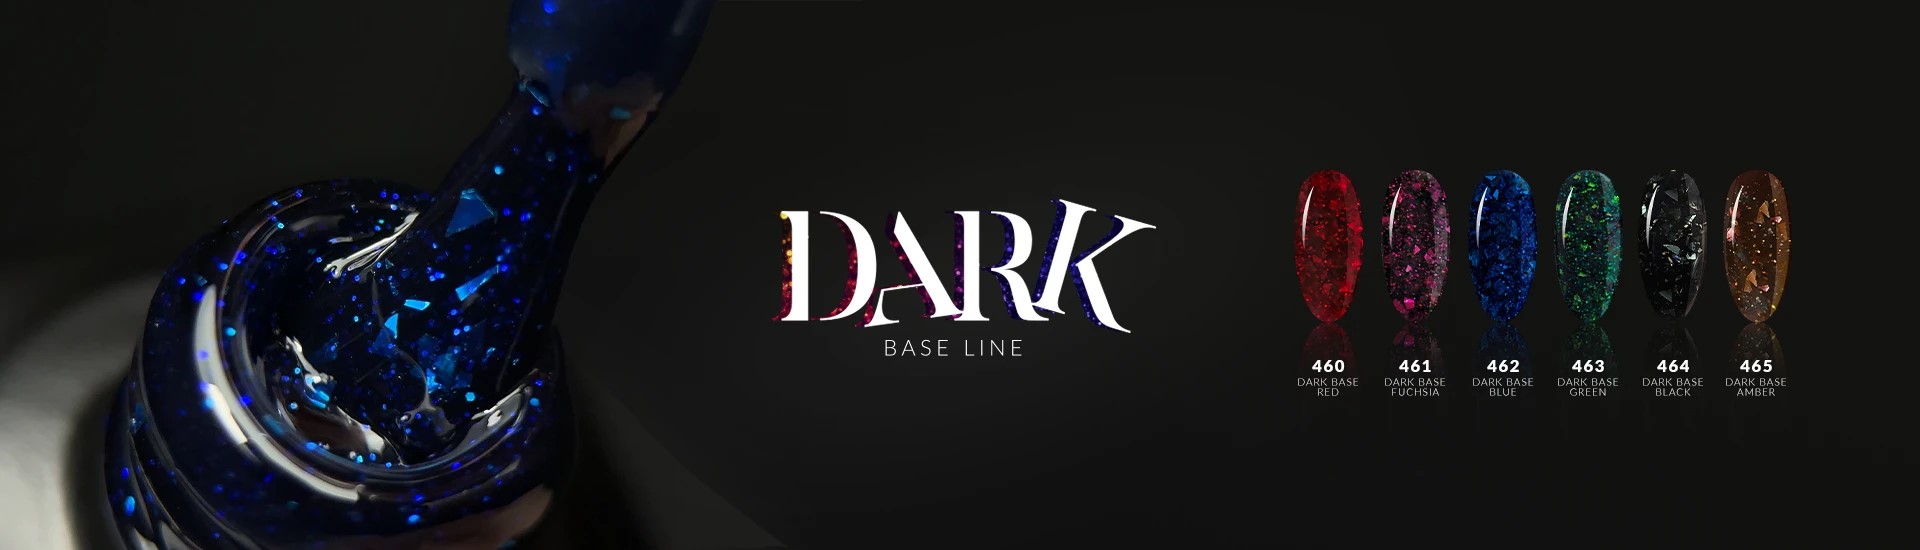 Dark Base Cover Line - Slowianka Collection